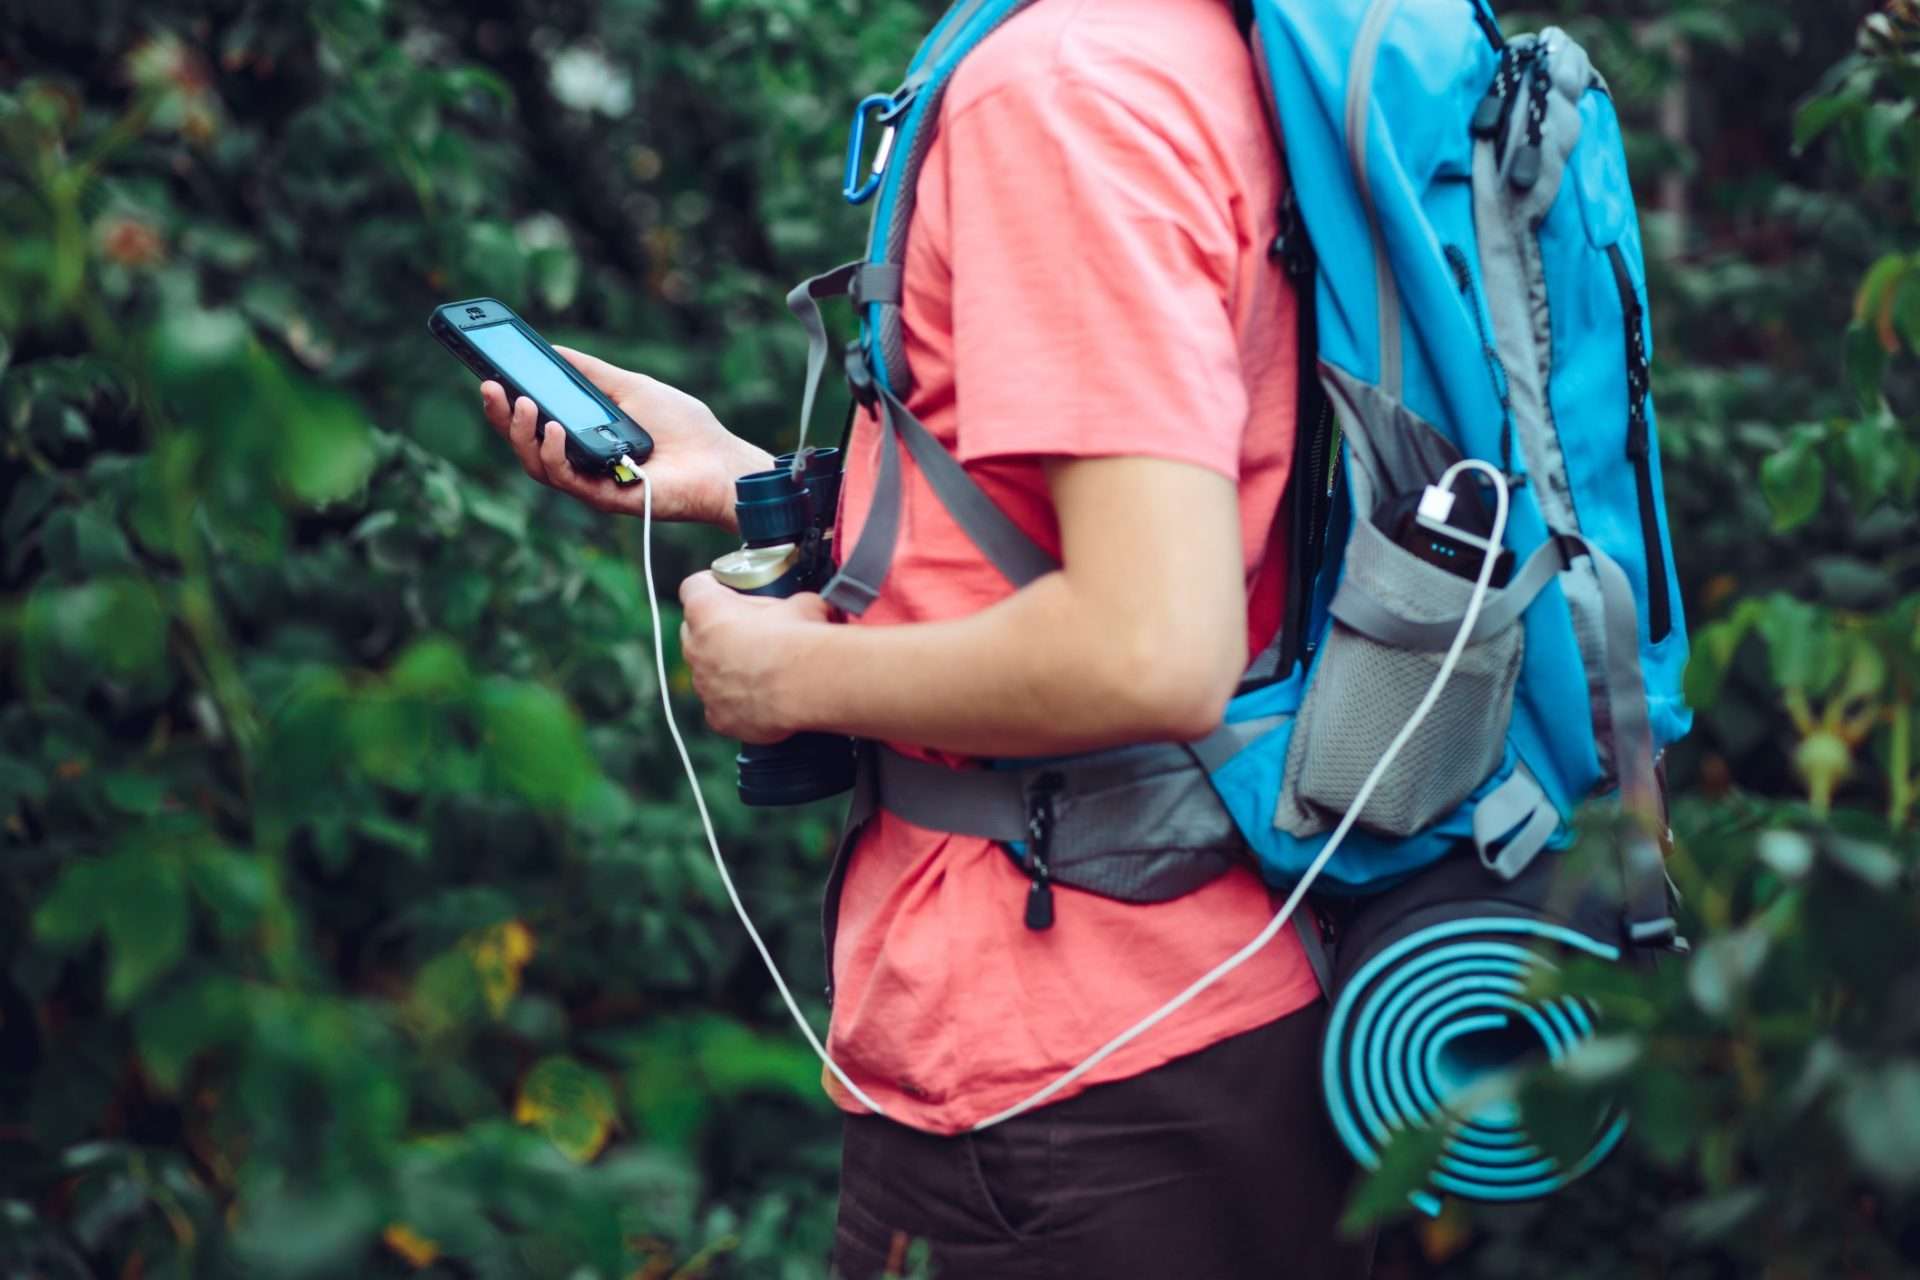 Man using phone in backpack while camping.